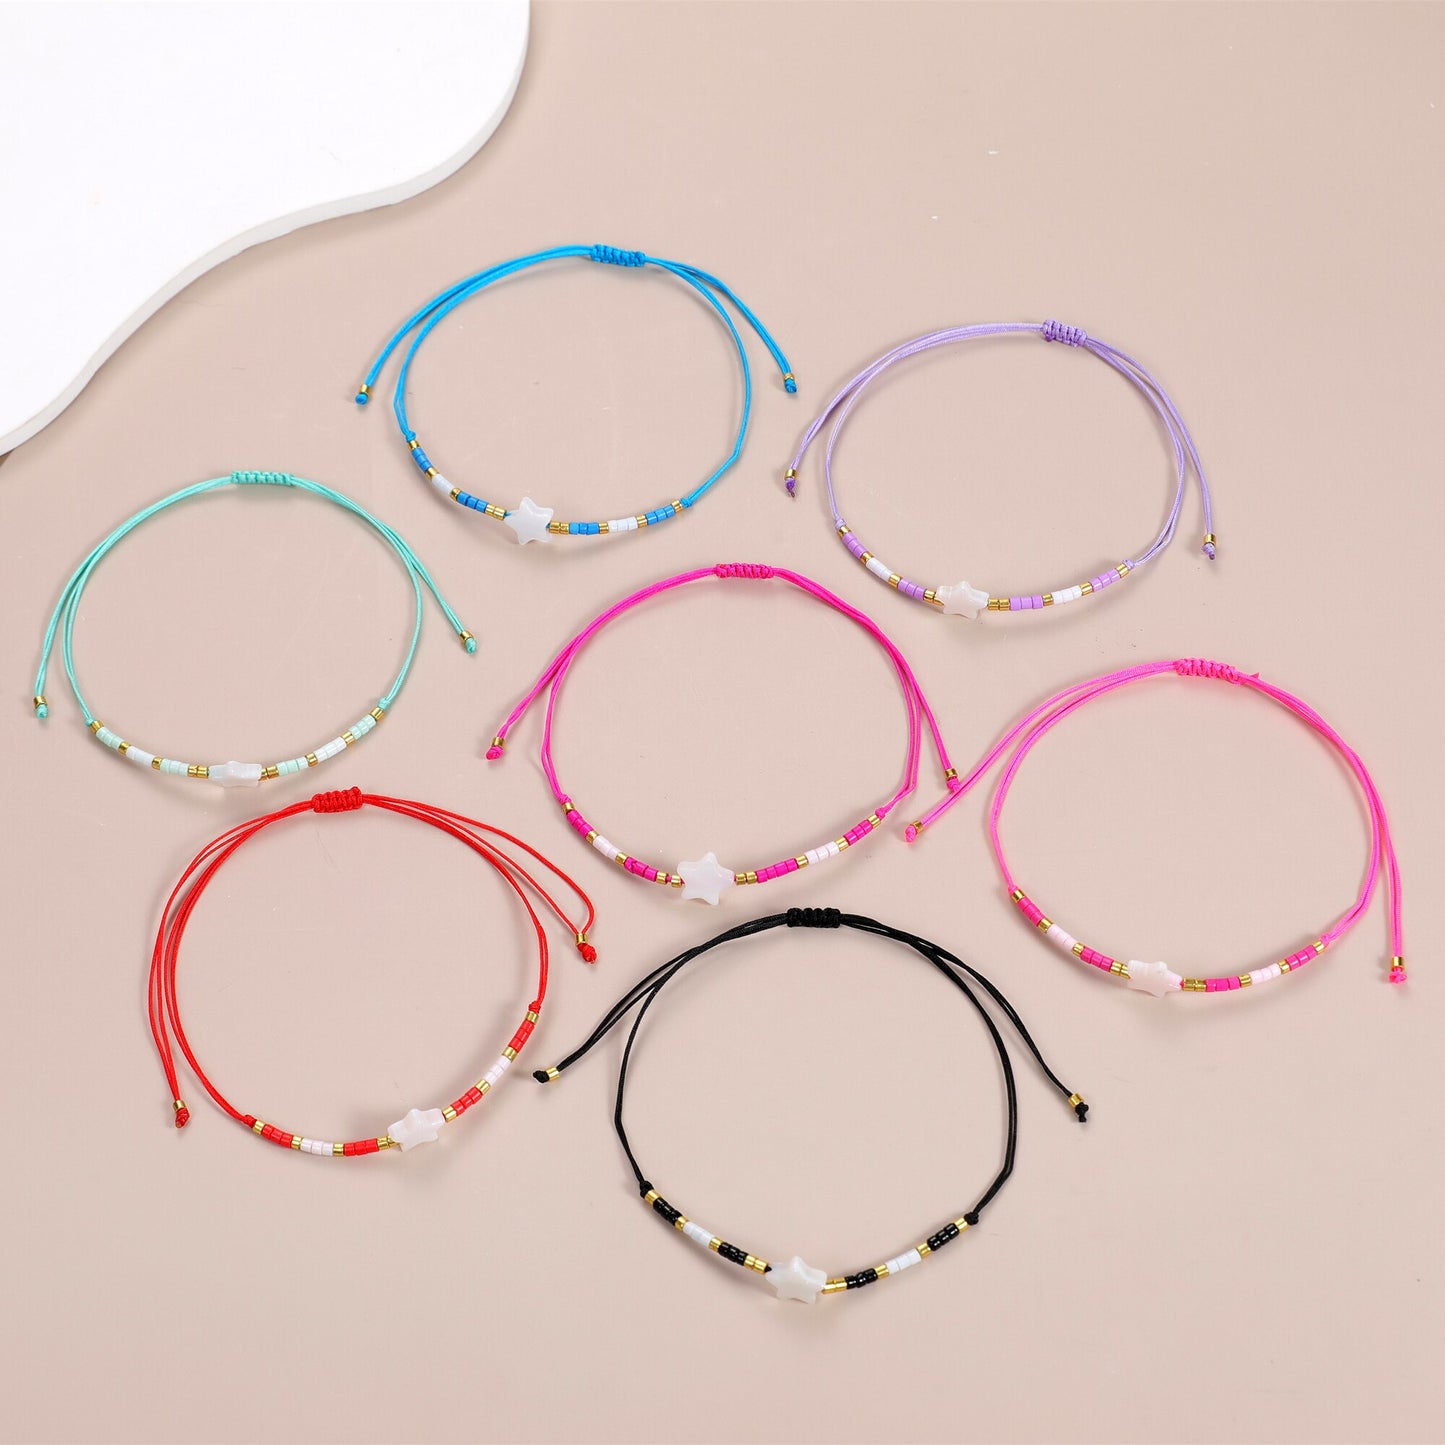 12pcs/set Shell Star Charms Bracelets High Quality Colorful Seeds Beads Handmade Braided Bracelet for Women Party Jewelry